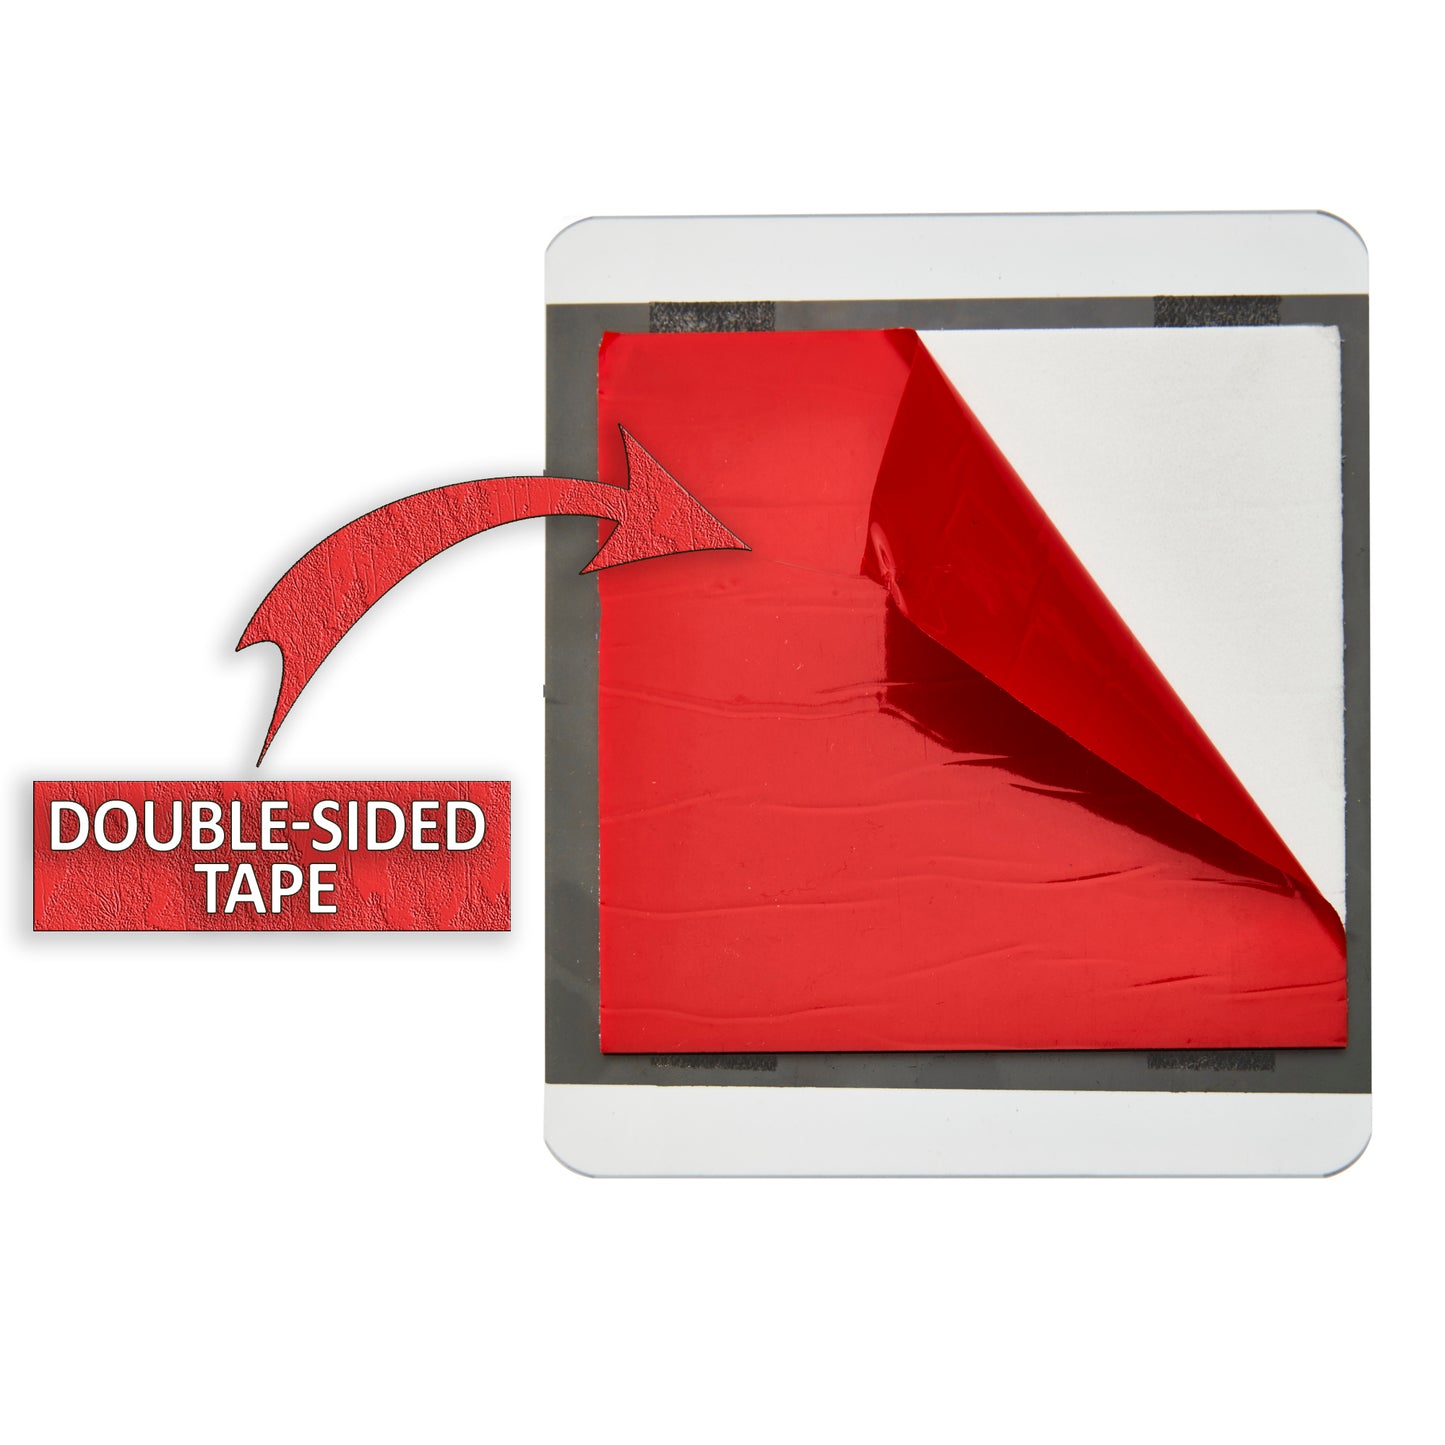 Toilet Bathroom Sign in 3D with Double-Sided Tape (UNISEX)